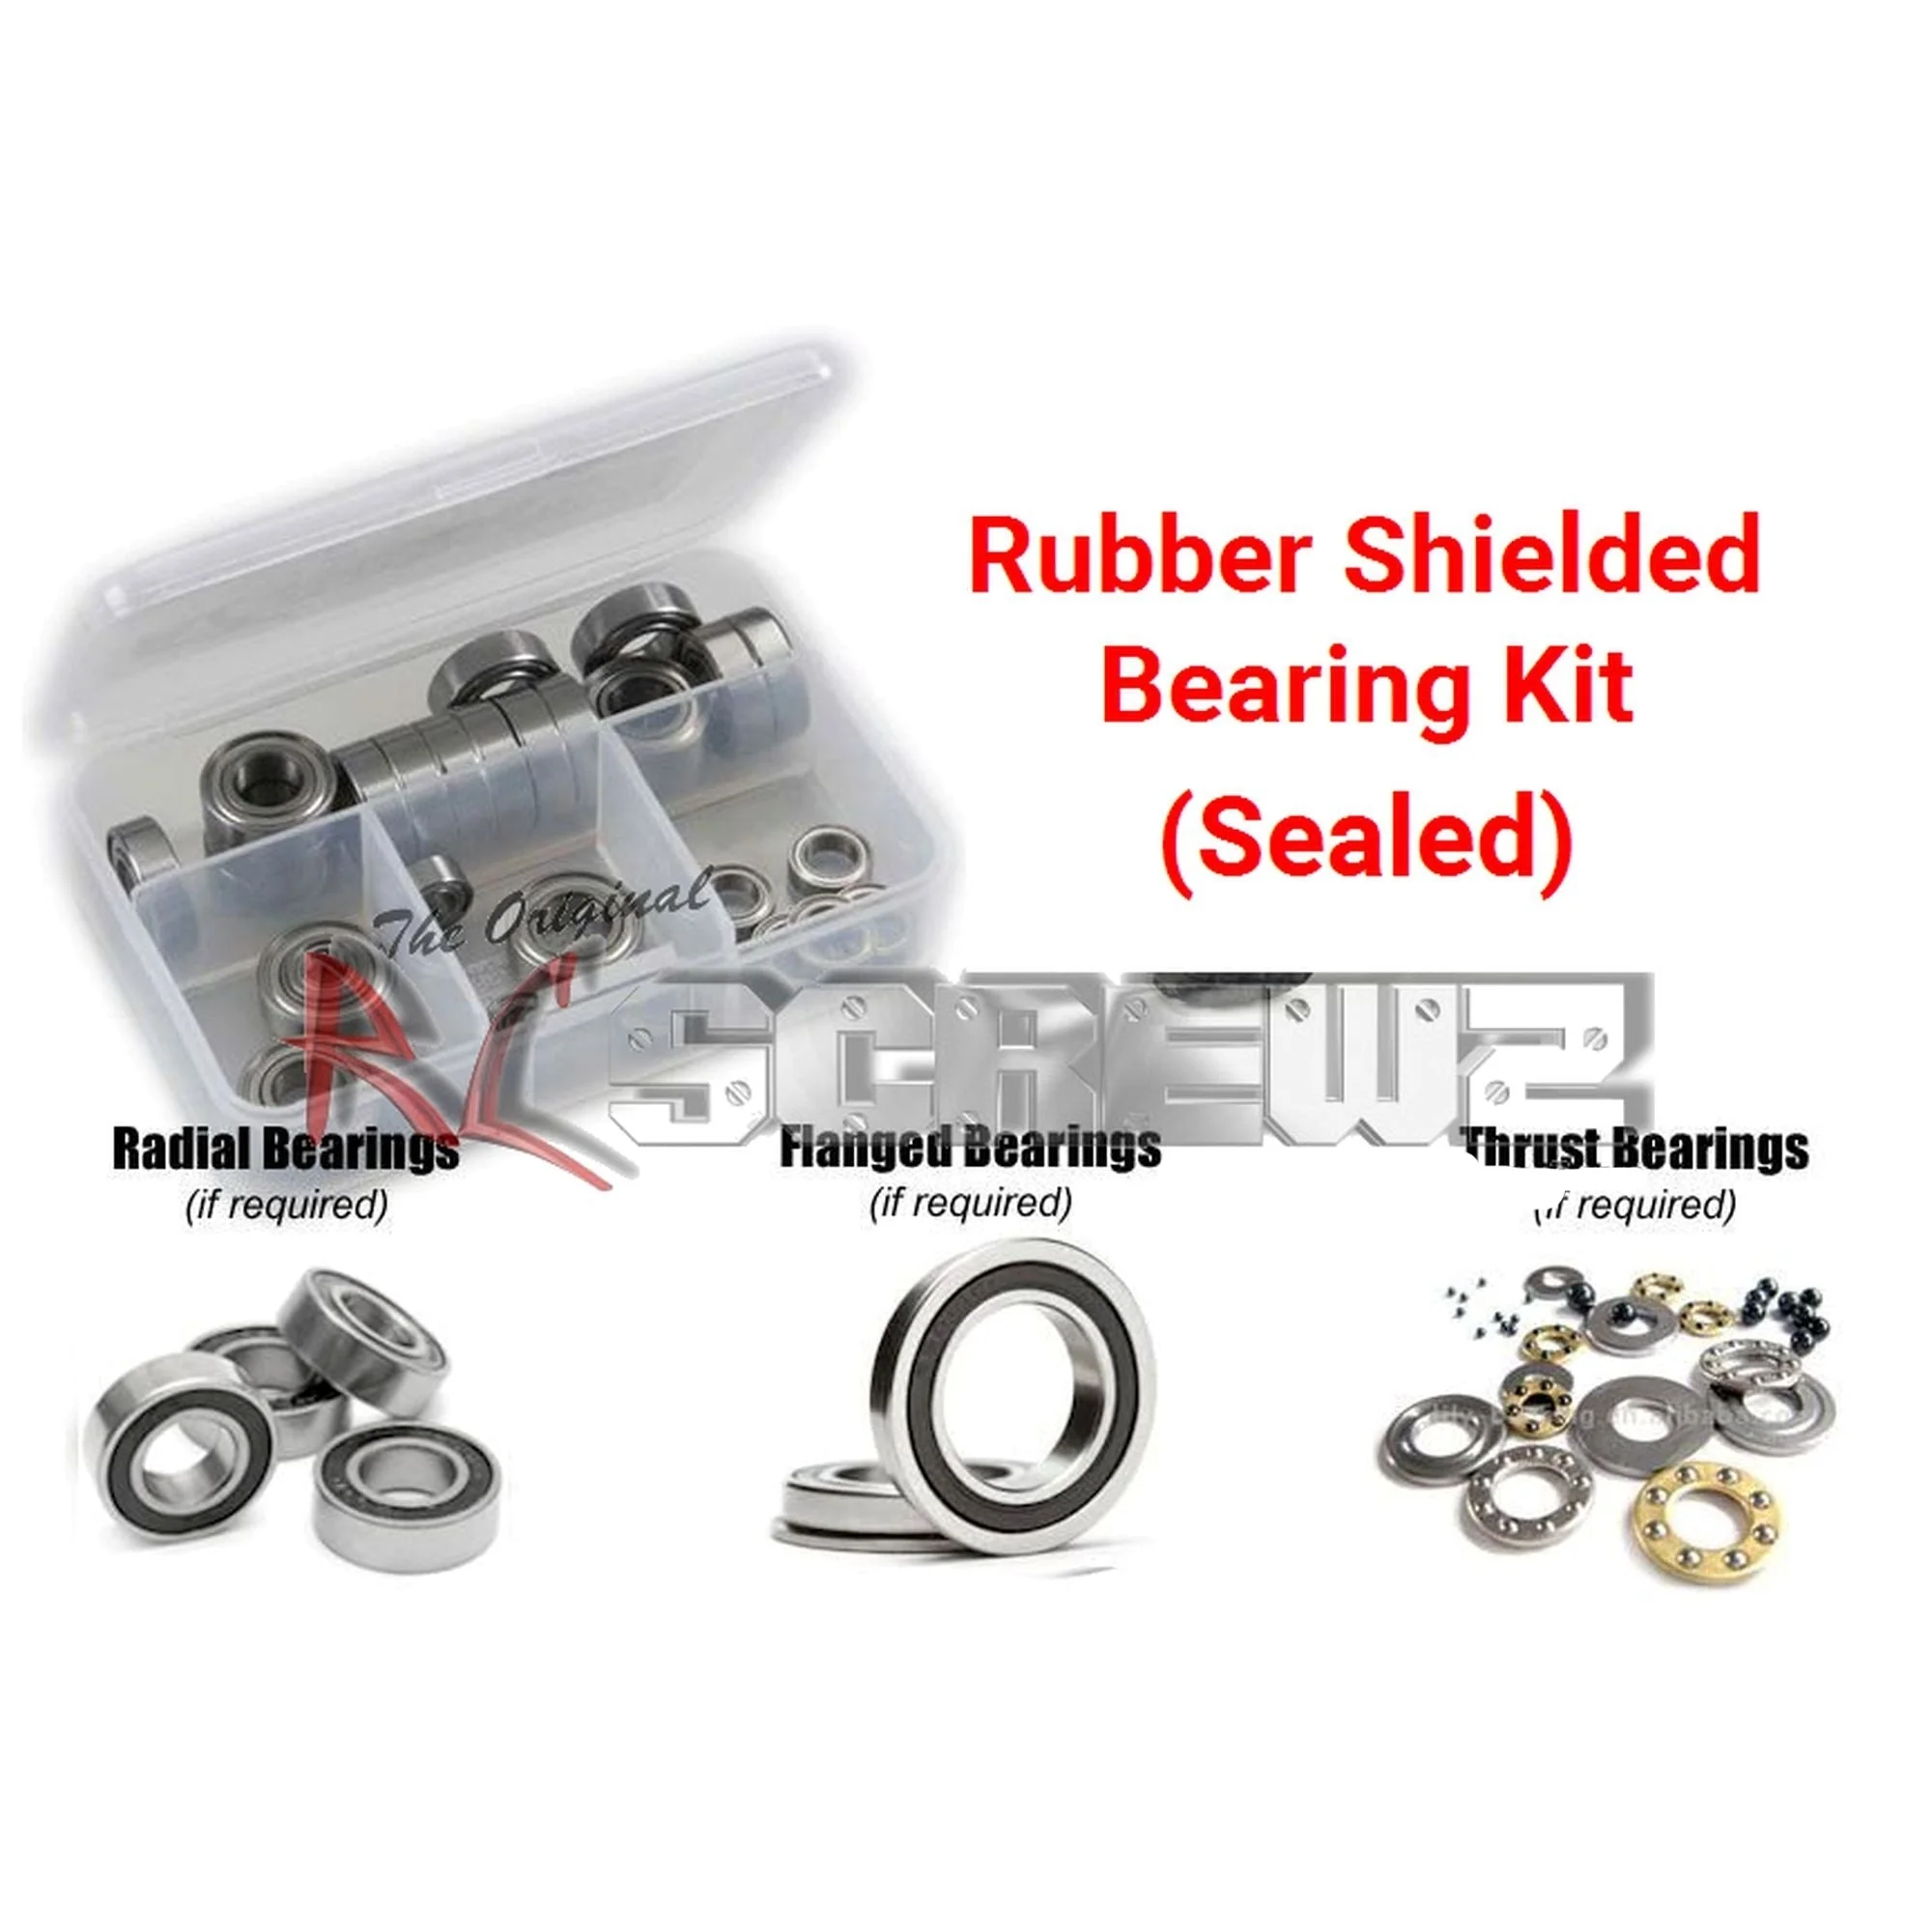 RCScrewZ Rubber Shielded Bearing Kit ass031r for Associated Mini MGT - Picture 1 of 12